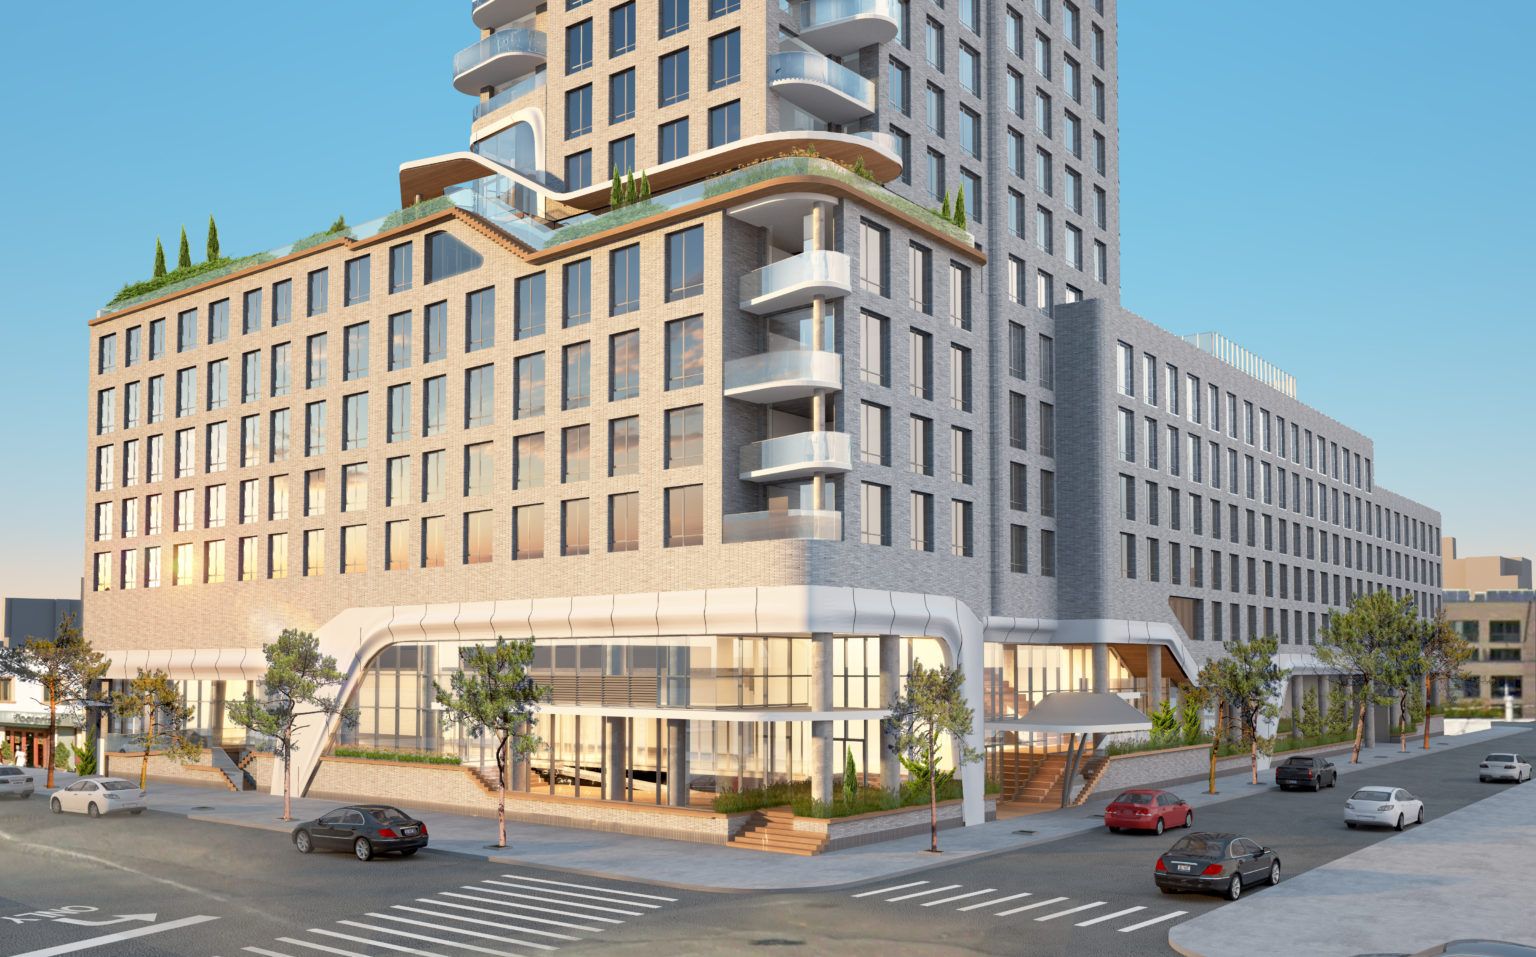 Construction Breaks Ground At 1515 Surf Avenue, Coney Island